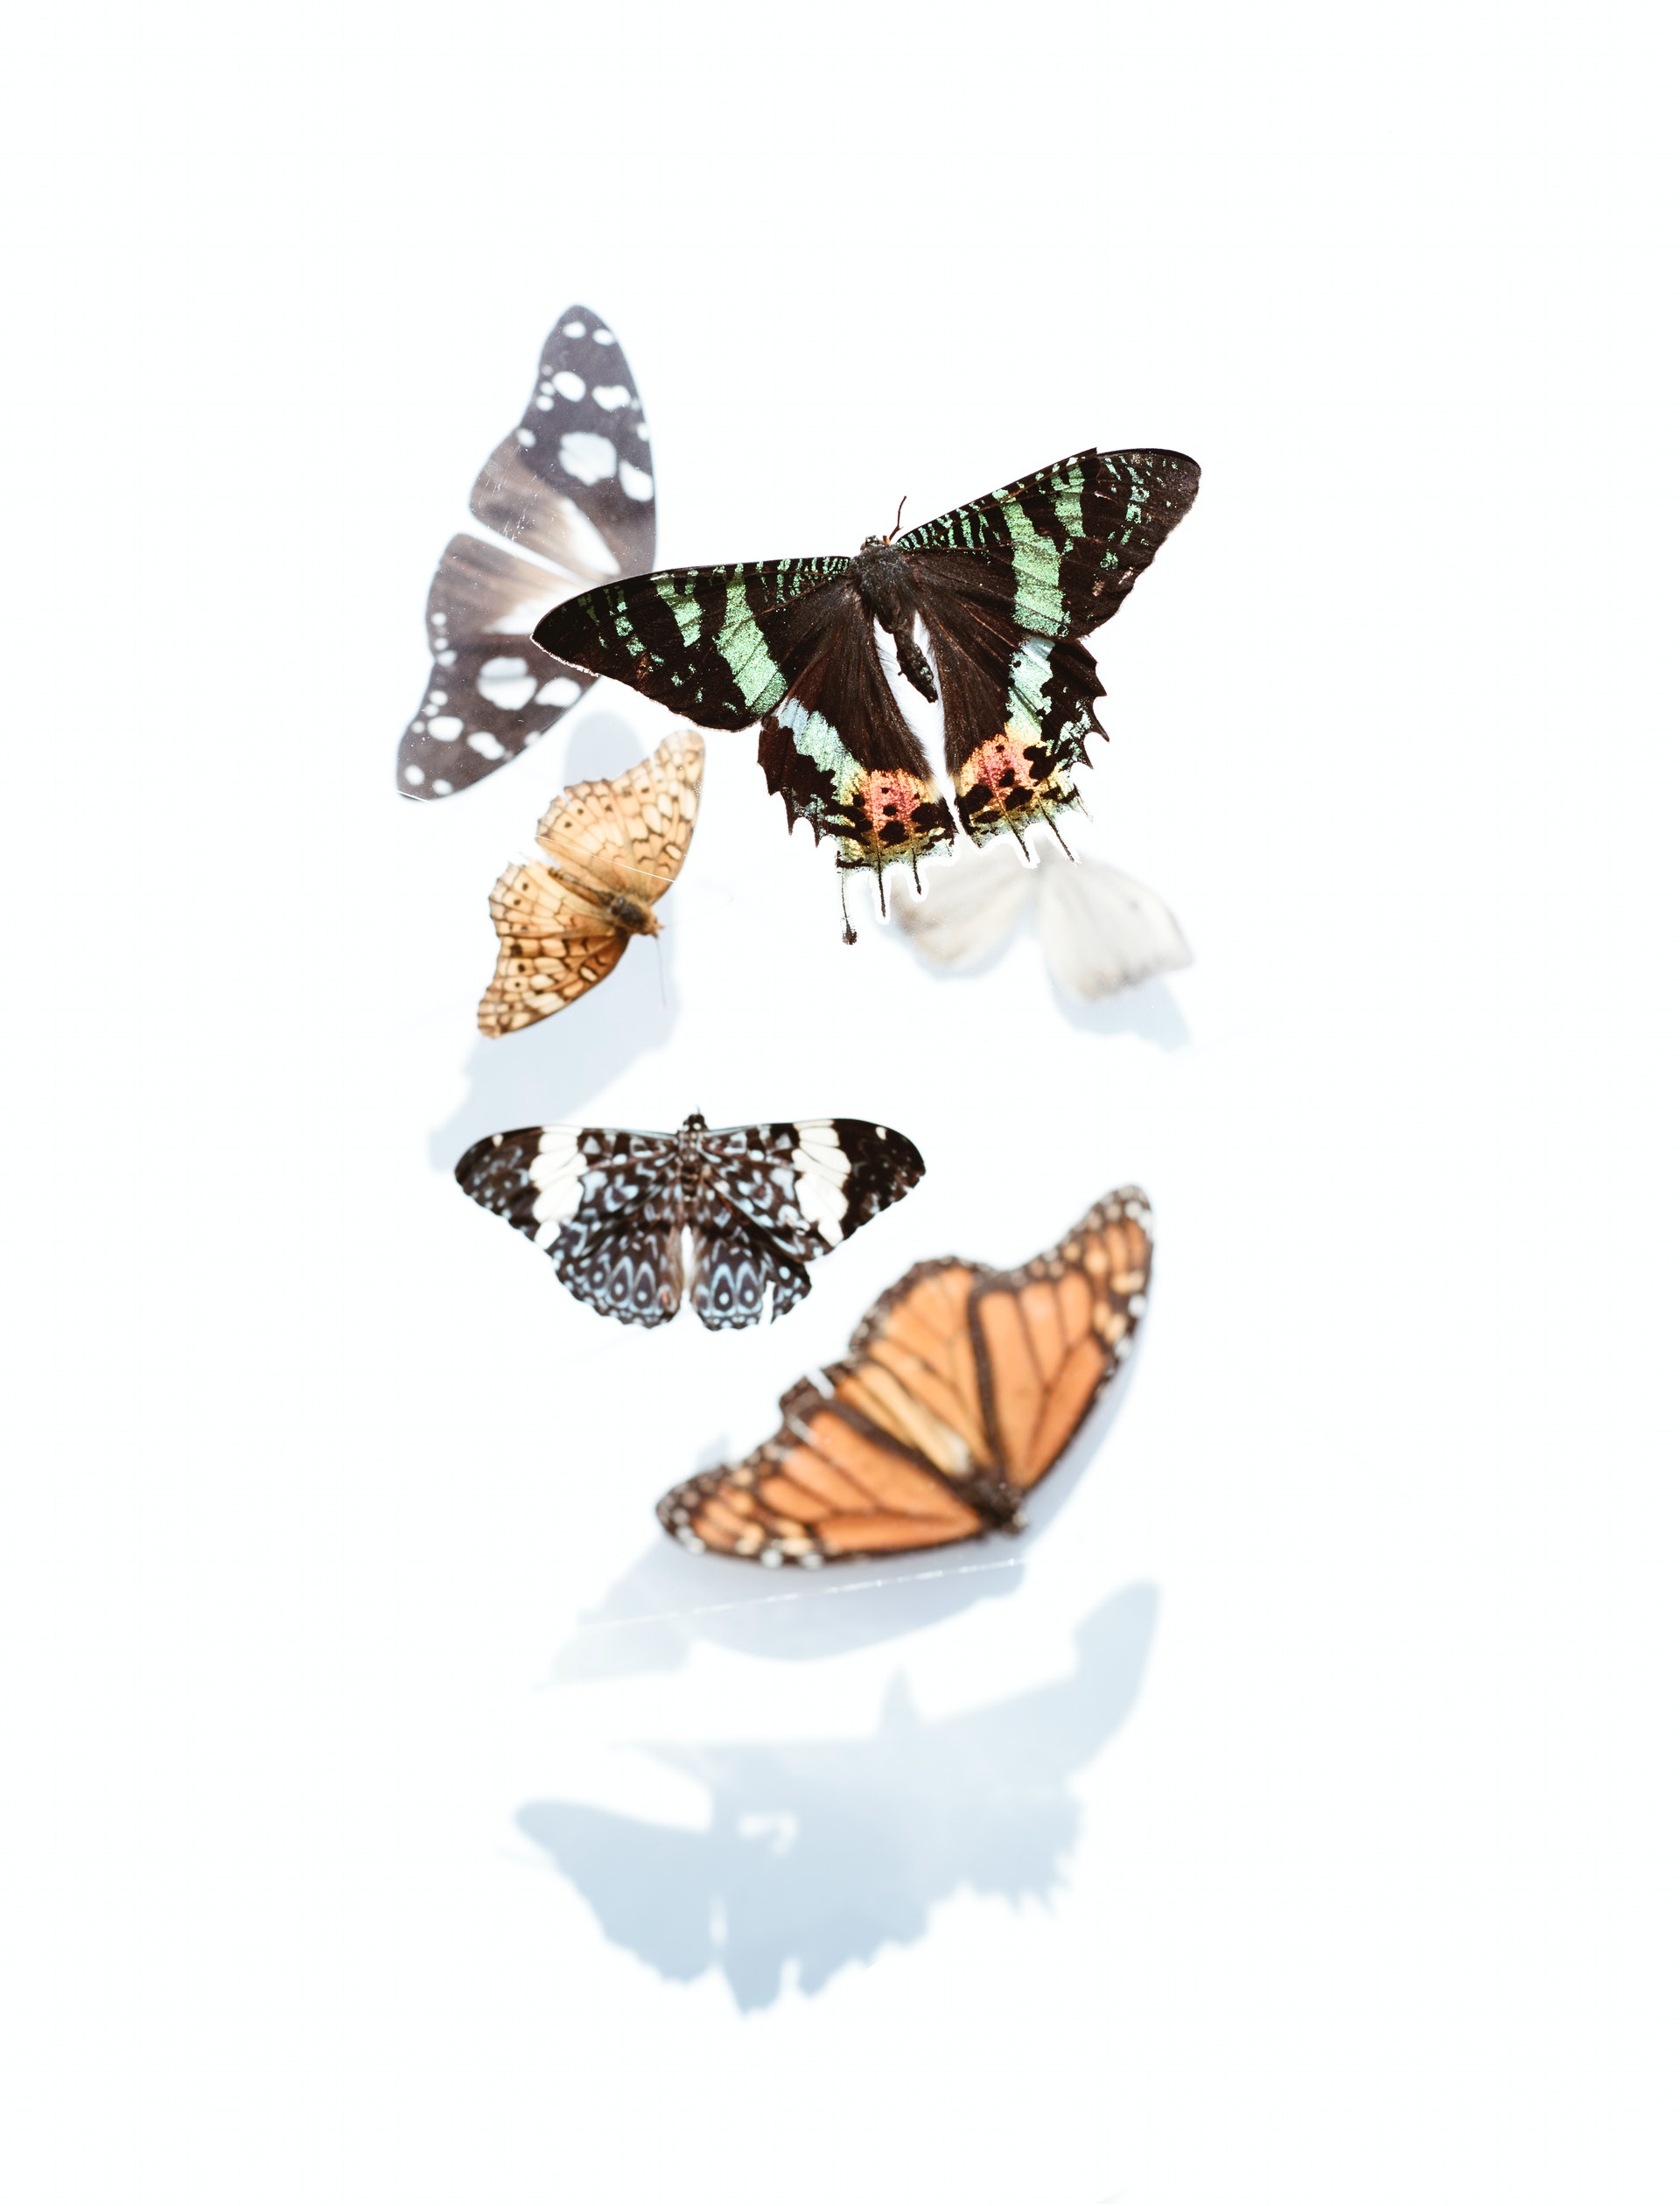 Butterflies and business missions evolve